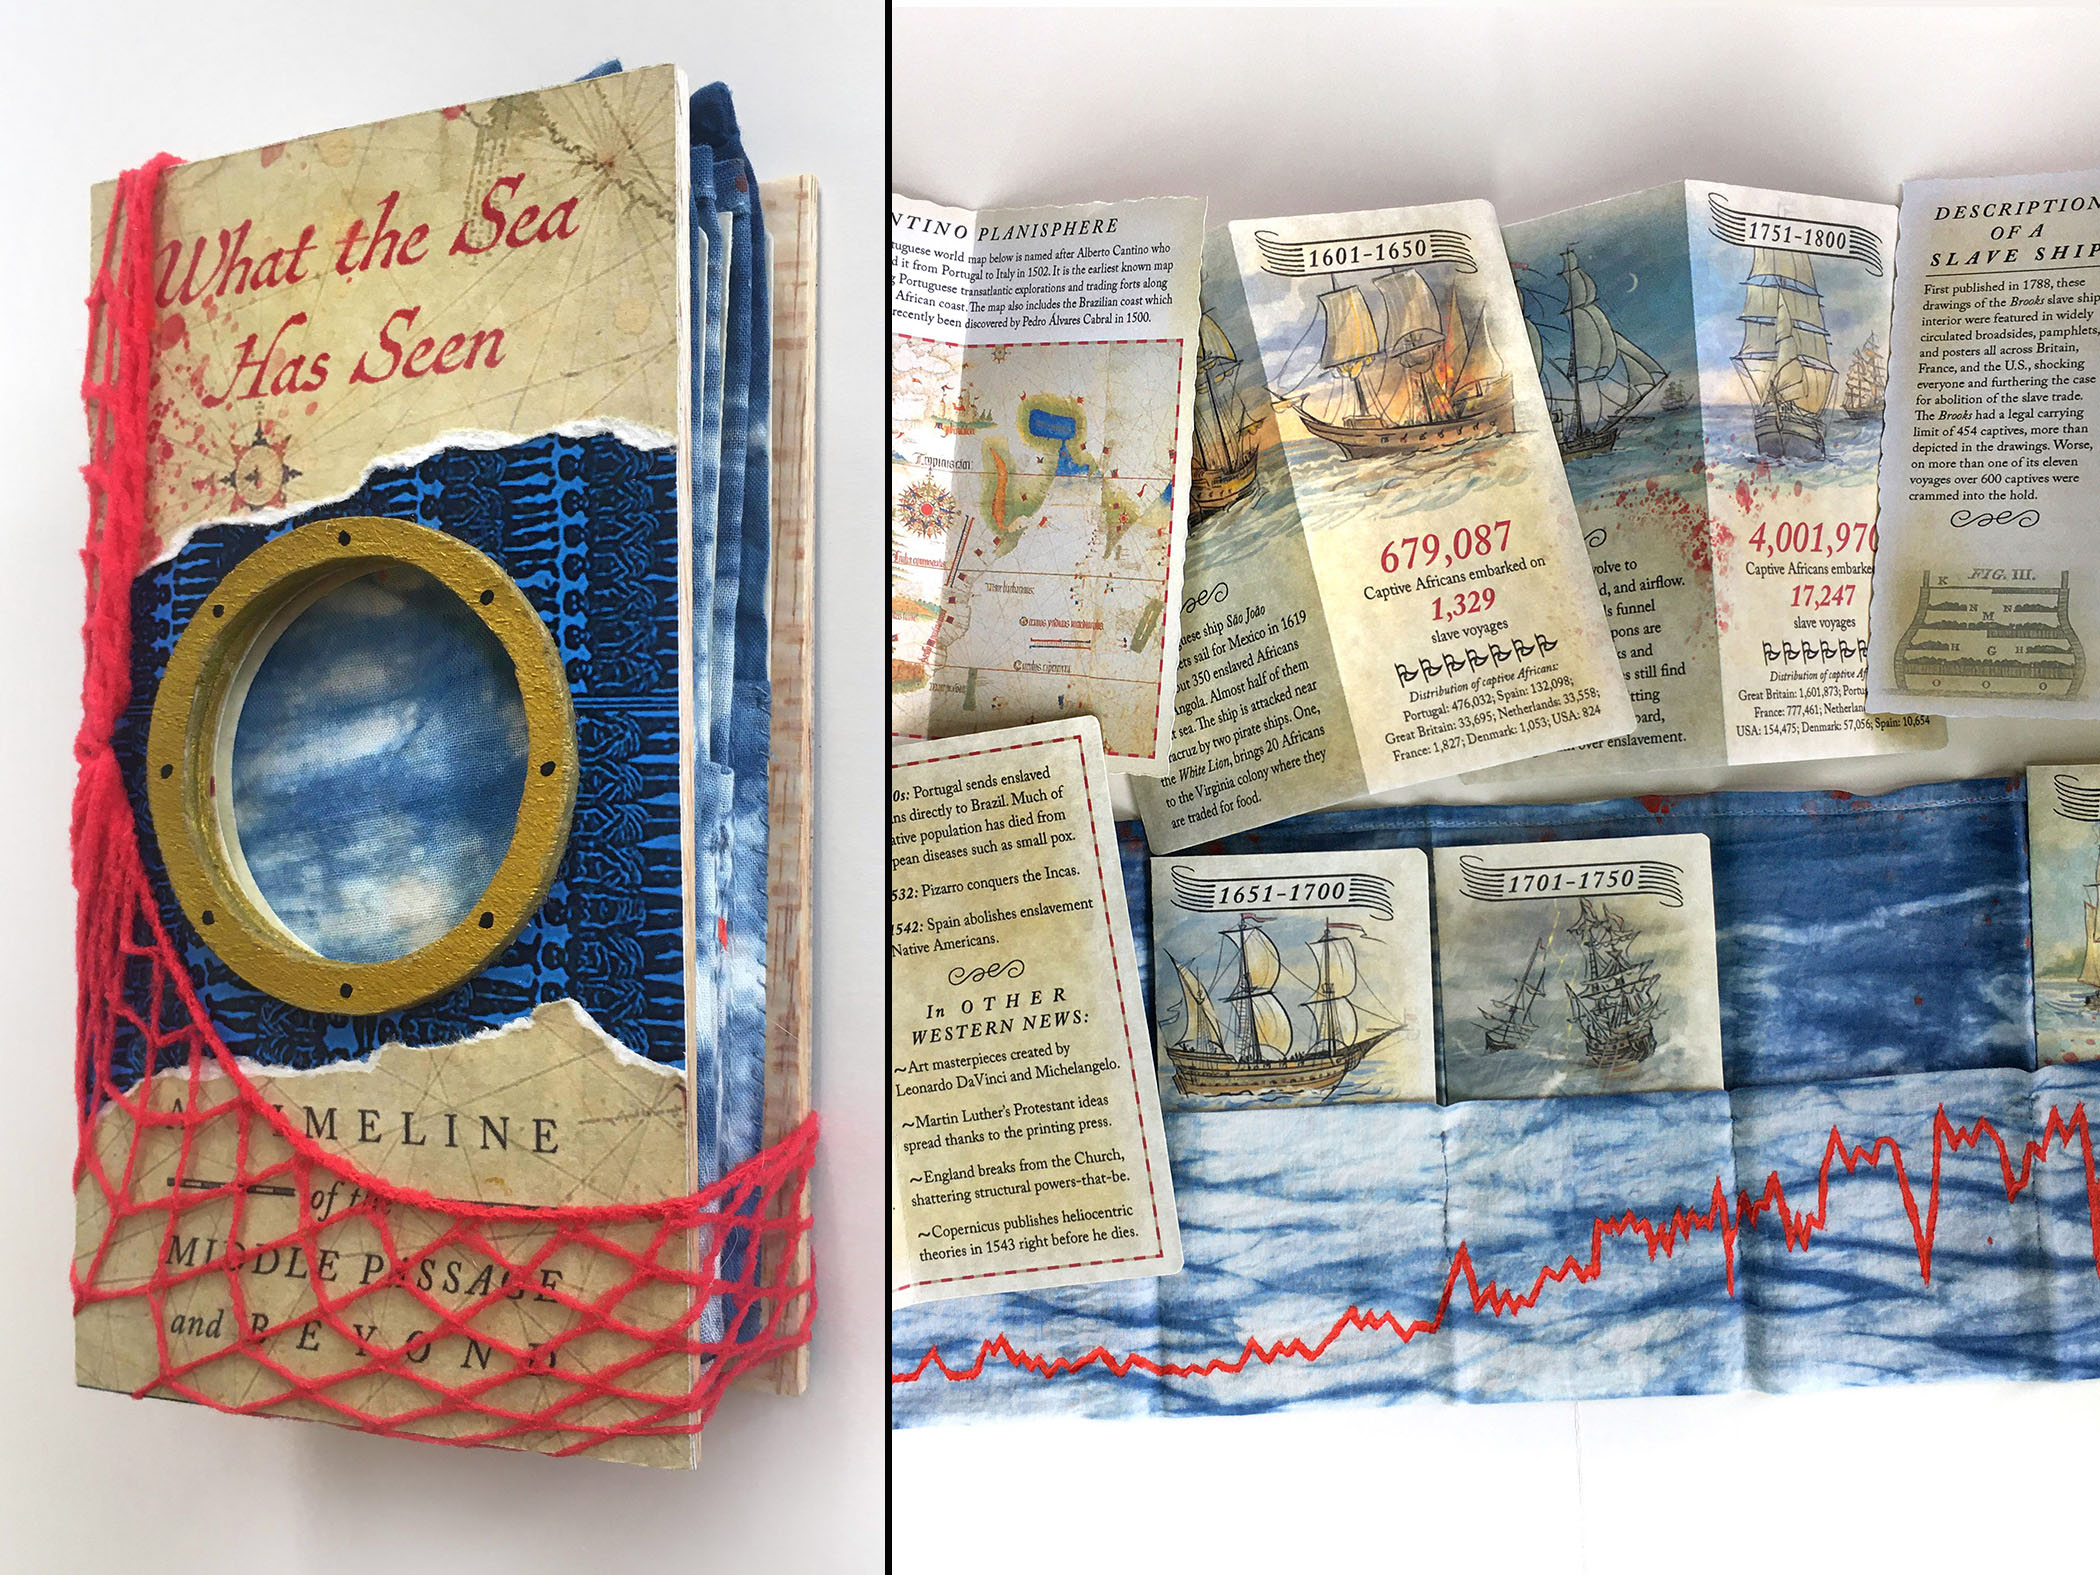 Artists book with blue paper and red netting